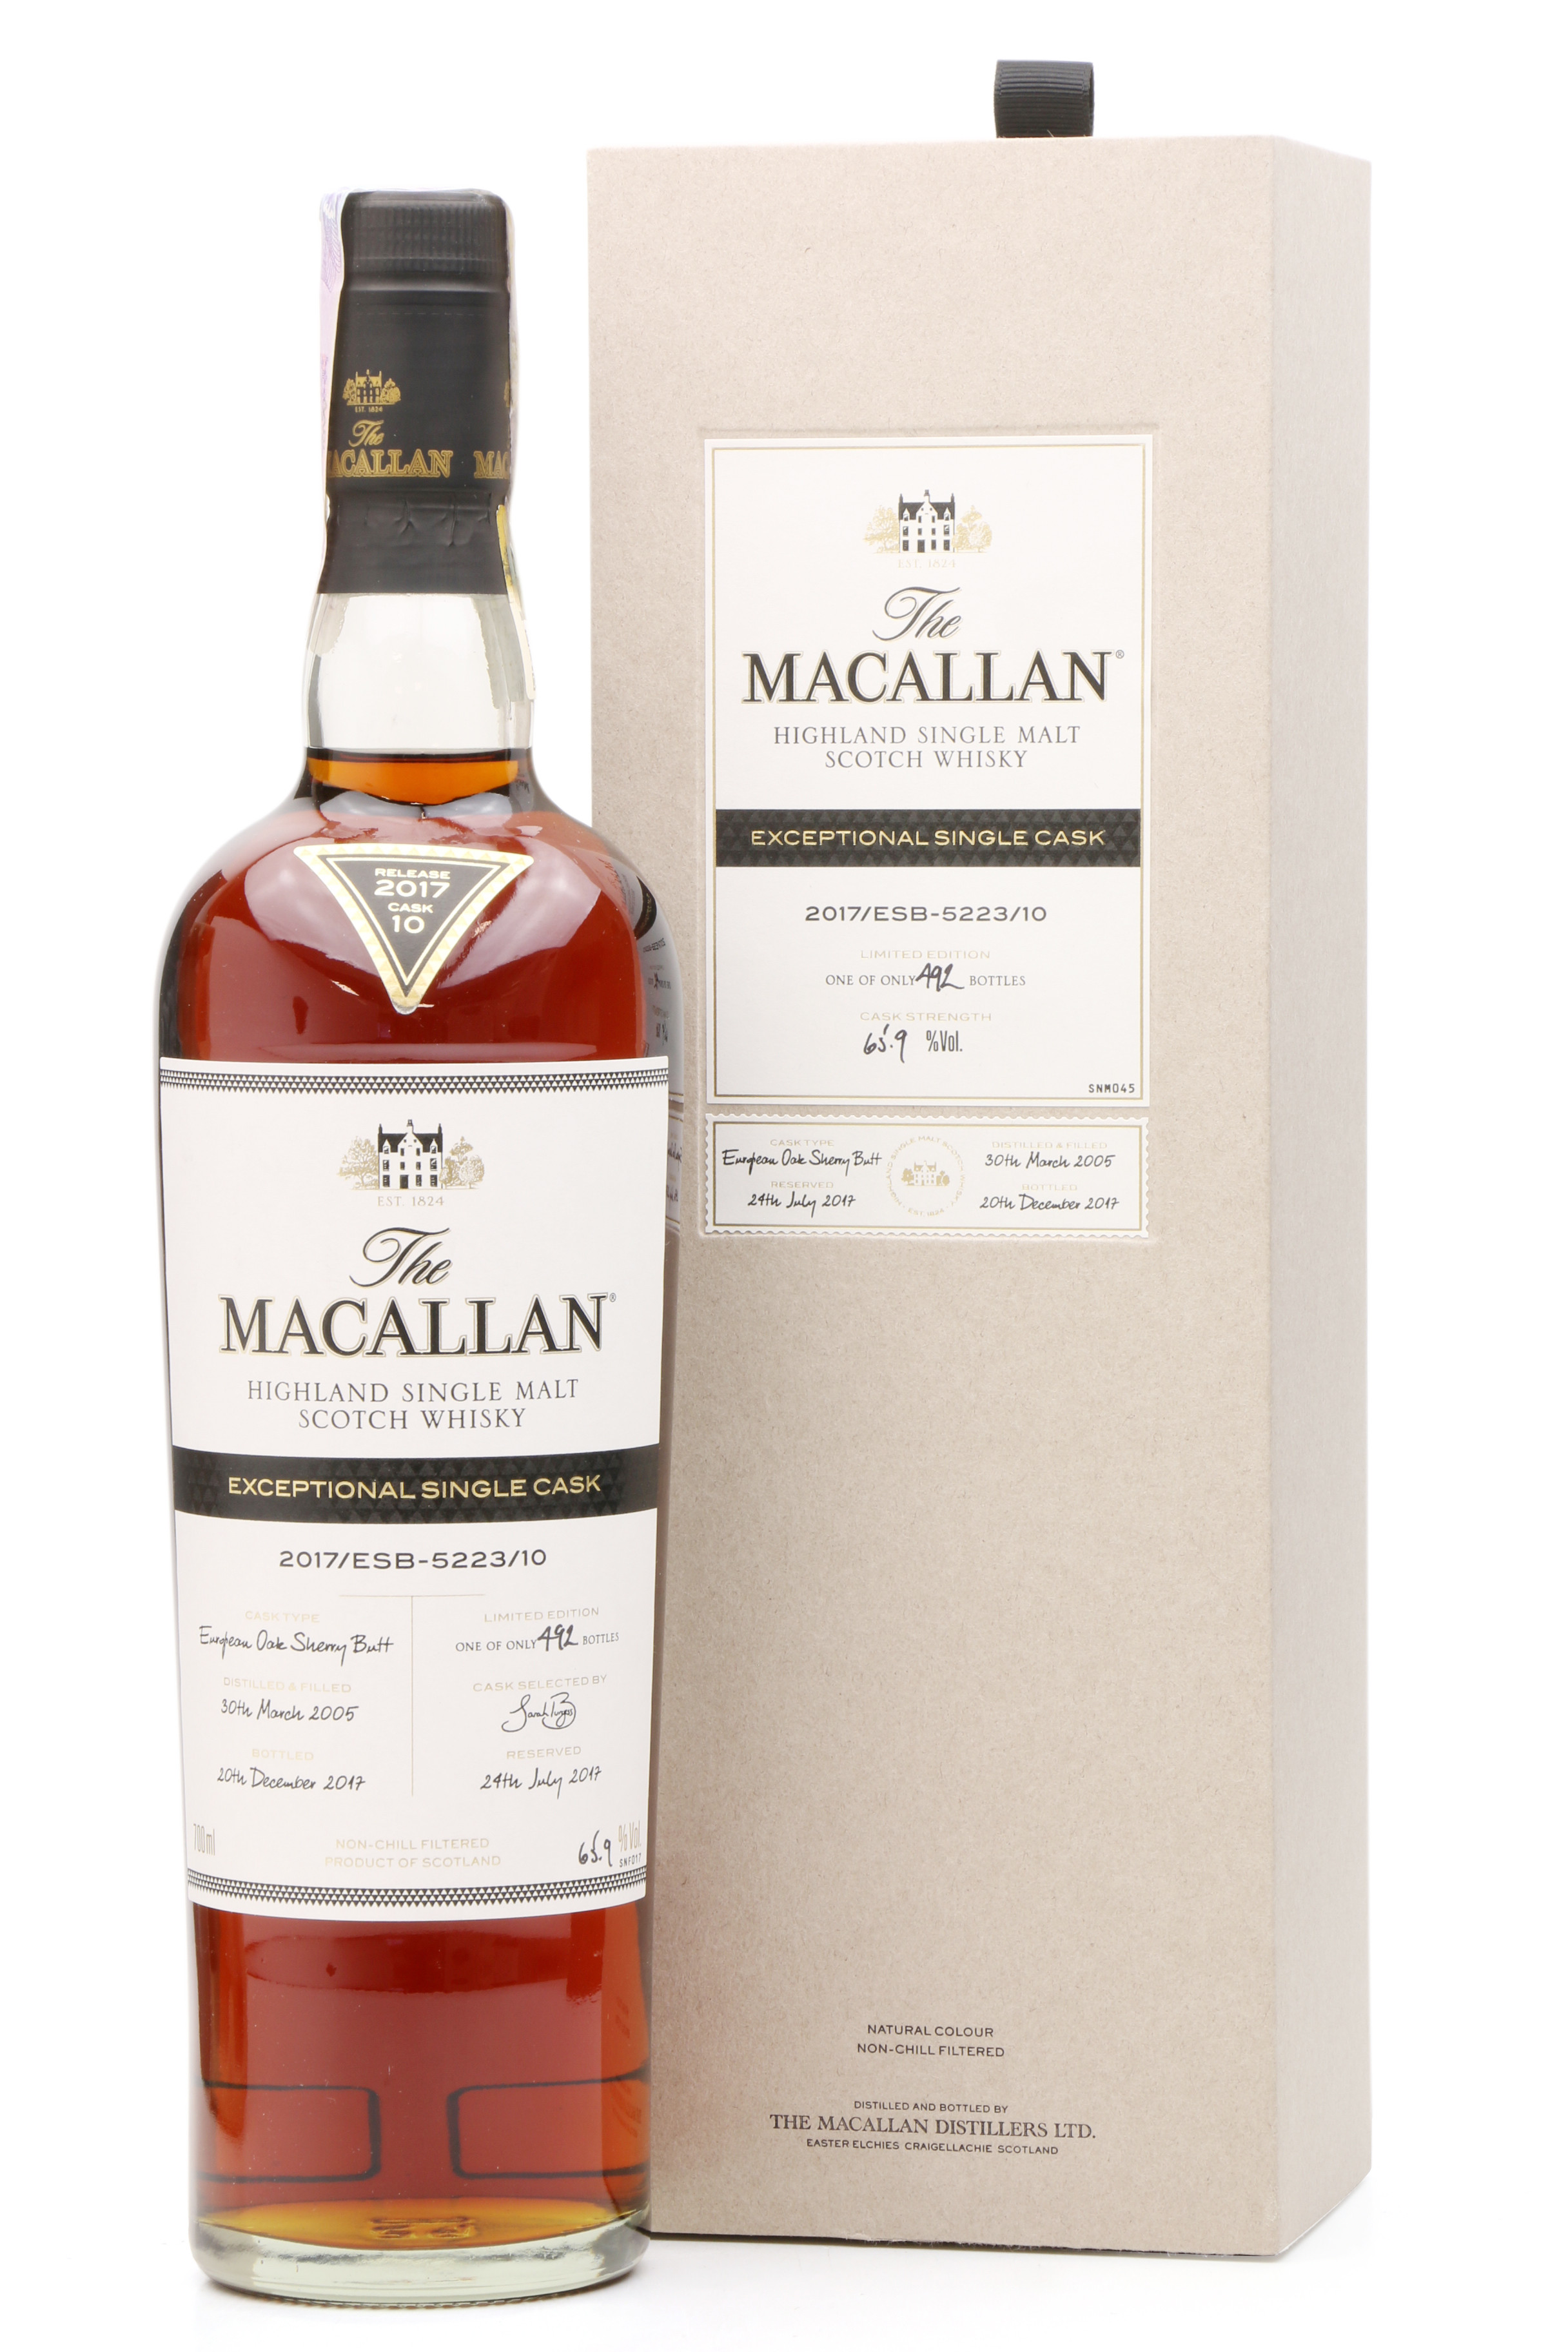 Macallan 2005 2017 Exceptional Single Cask No 5223 10 Just Whisky Auctions